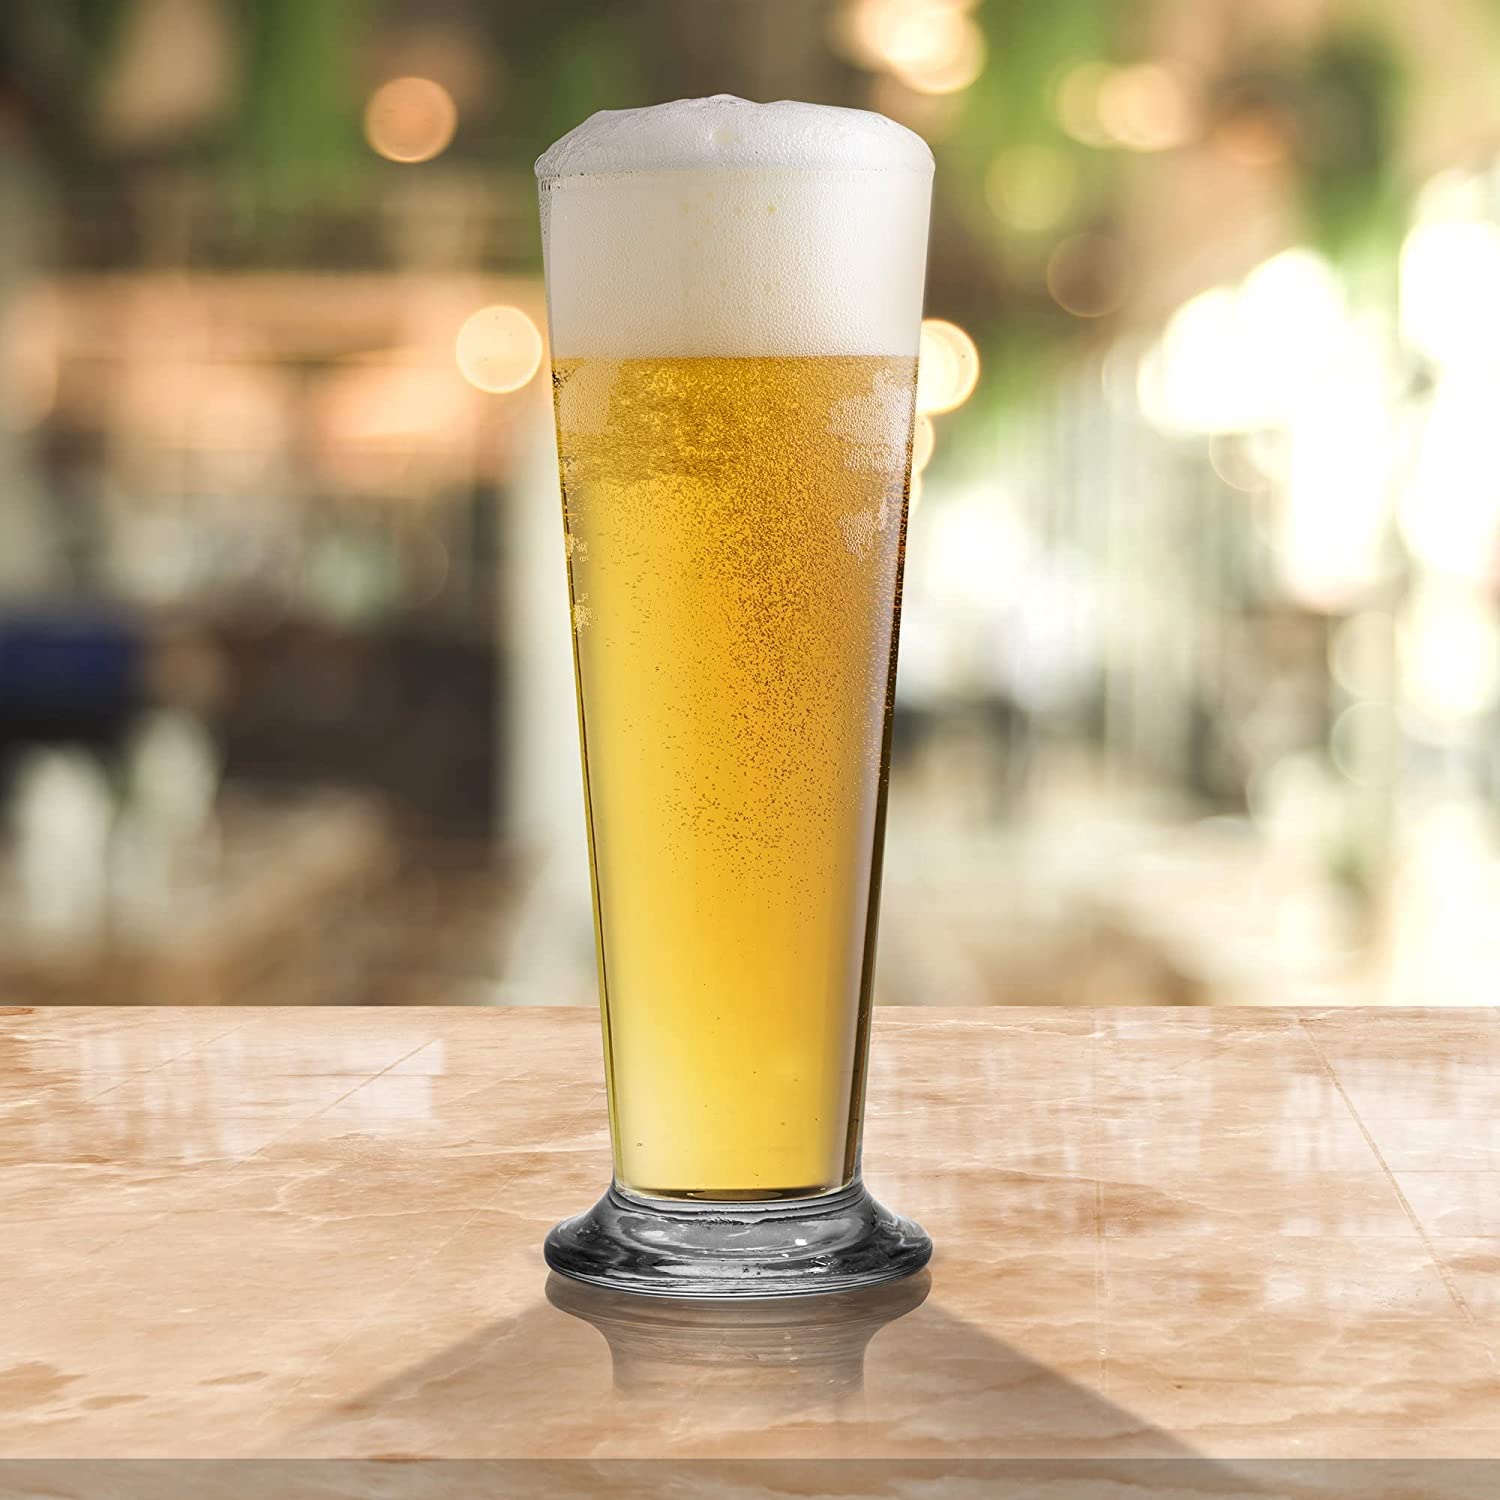 Classic Beer Glass - Enjoy your favorite brew in this timeless beer glass.